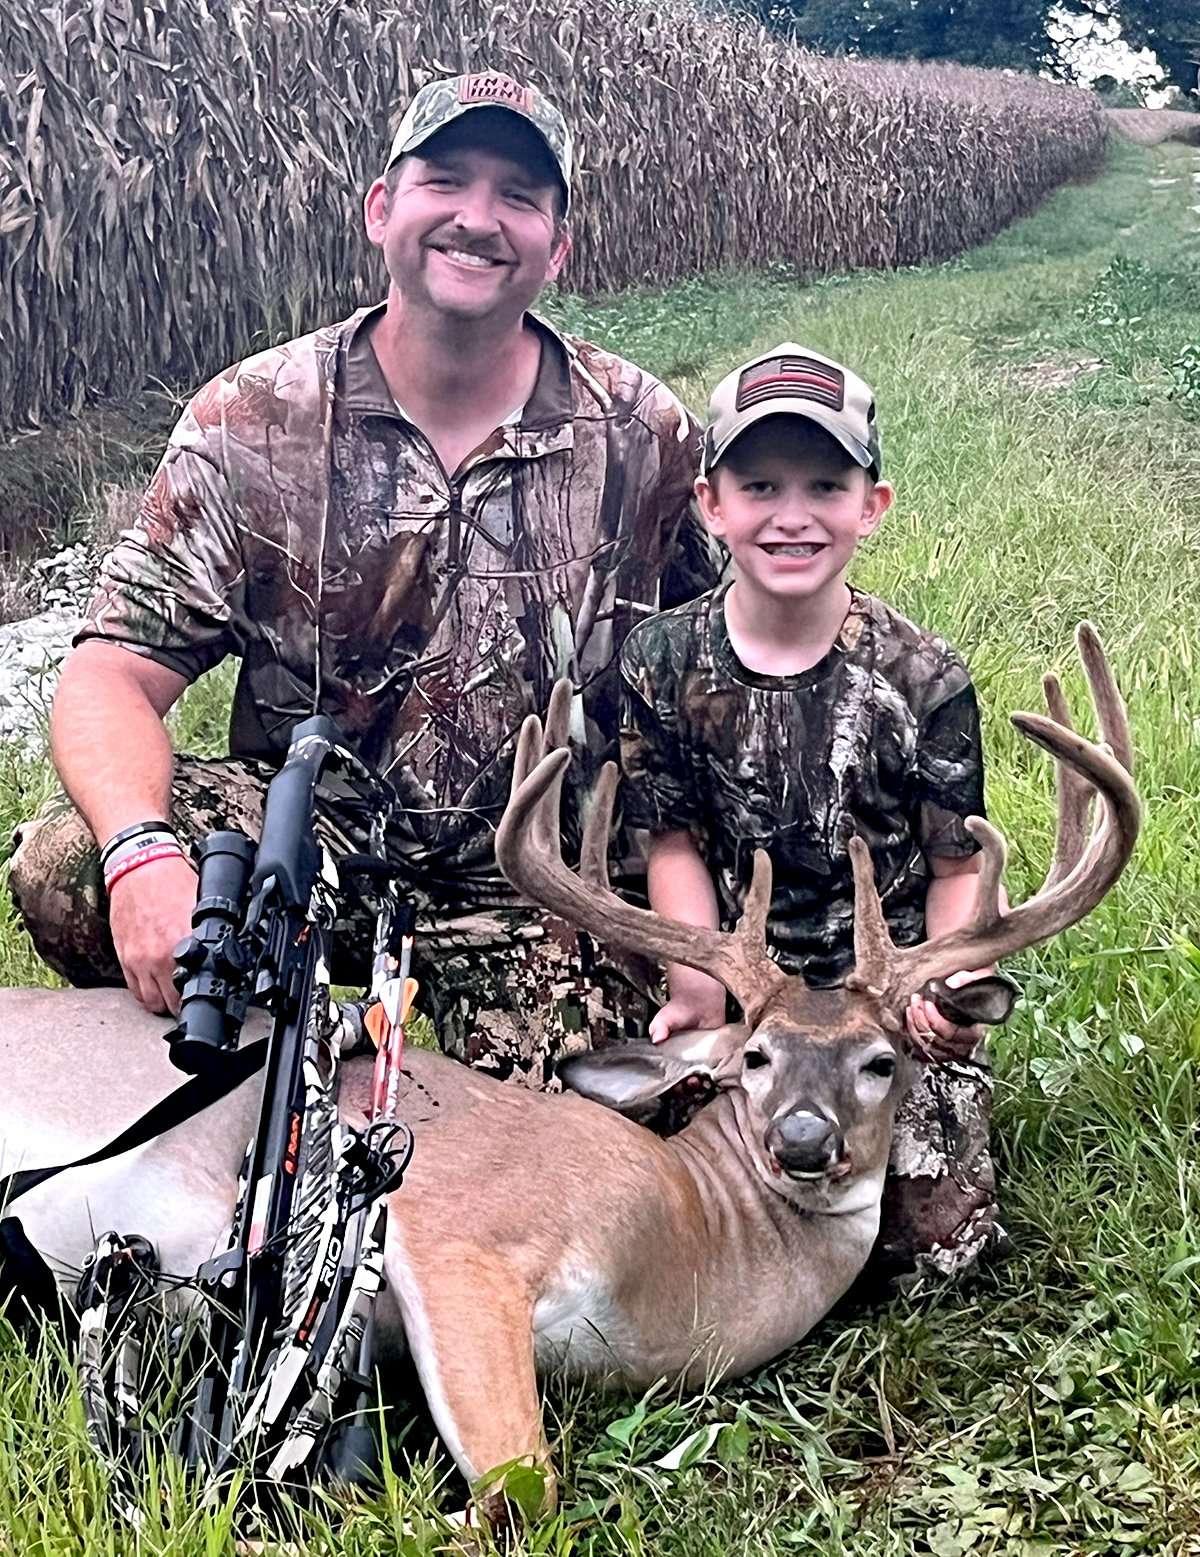 Chris and Corbin Buchanon were incredibly happy with the outcome of this hunt. Image courtesy of Chris Buchanon